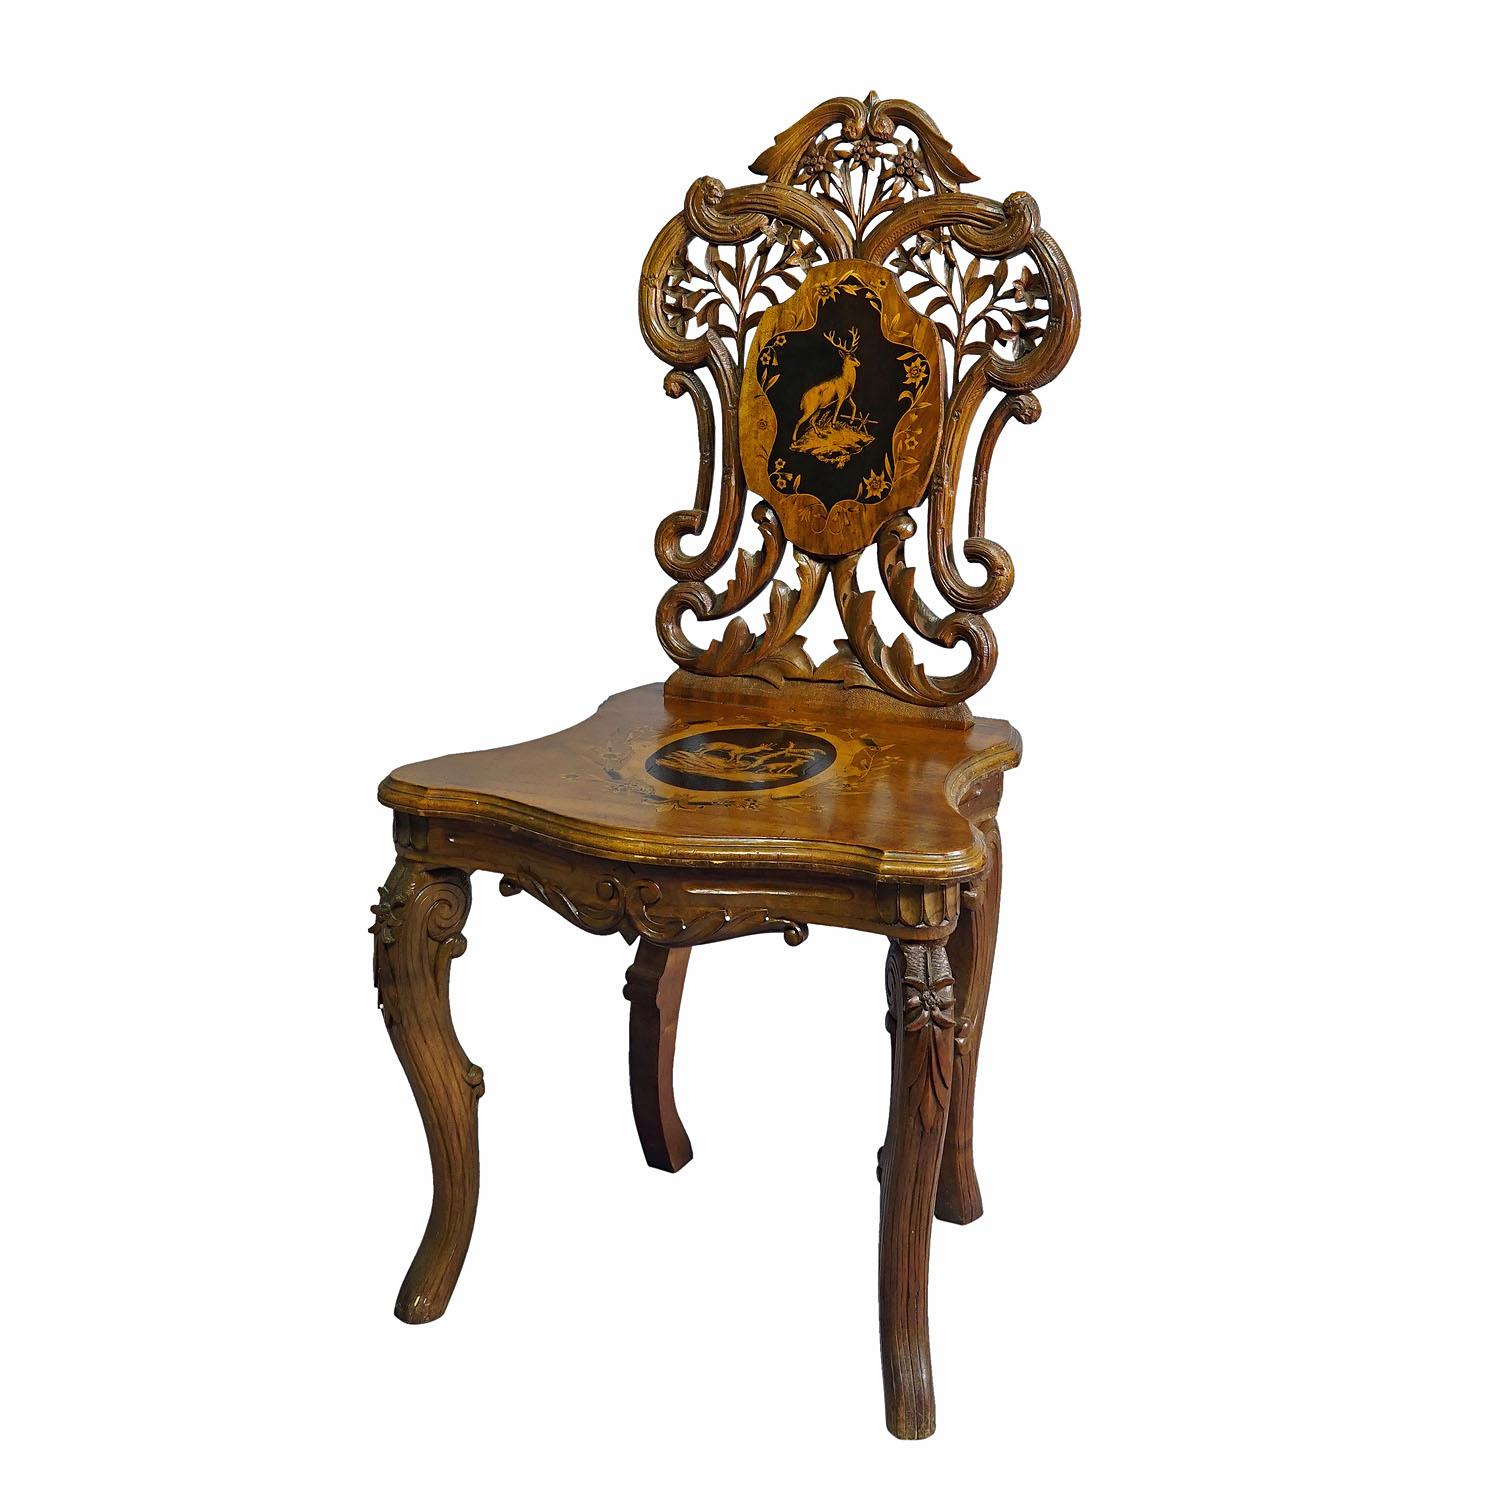 Nutwood Edelweis Marquetry Chair Swiss Brienz 1900

A wonderful inlayed nutwood chair decorated with inlayed and painted sceneries depicting chamois, stag and edelweis flowers. Surrounded by ebony and lindenwood marquetry. Manufactured ca. 1900 in